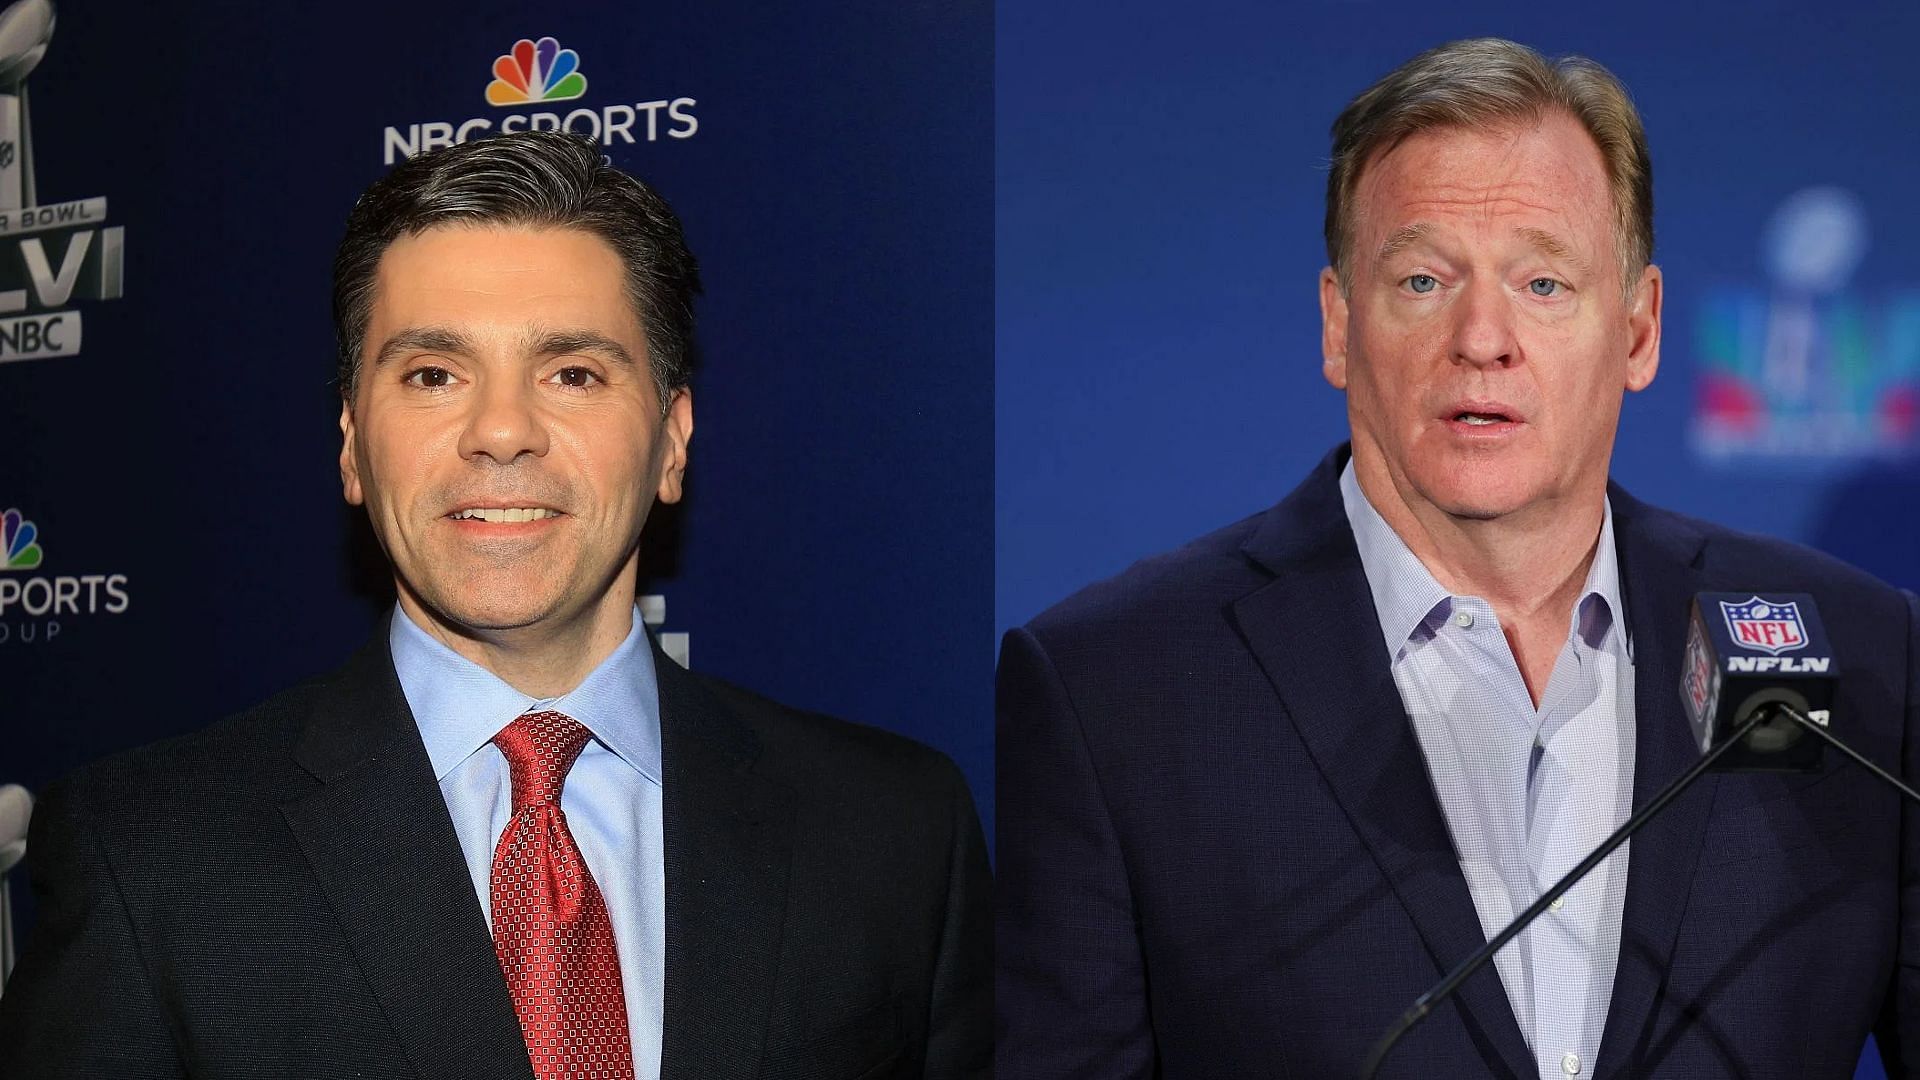 Florio wants betting no sports banned outright in the NFL.